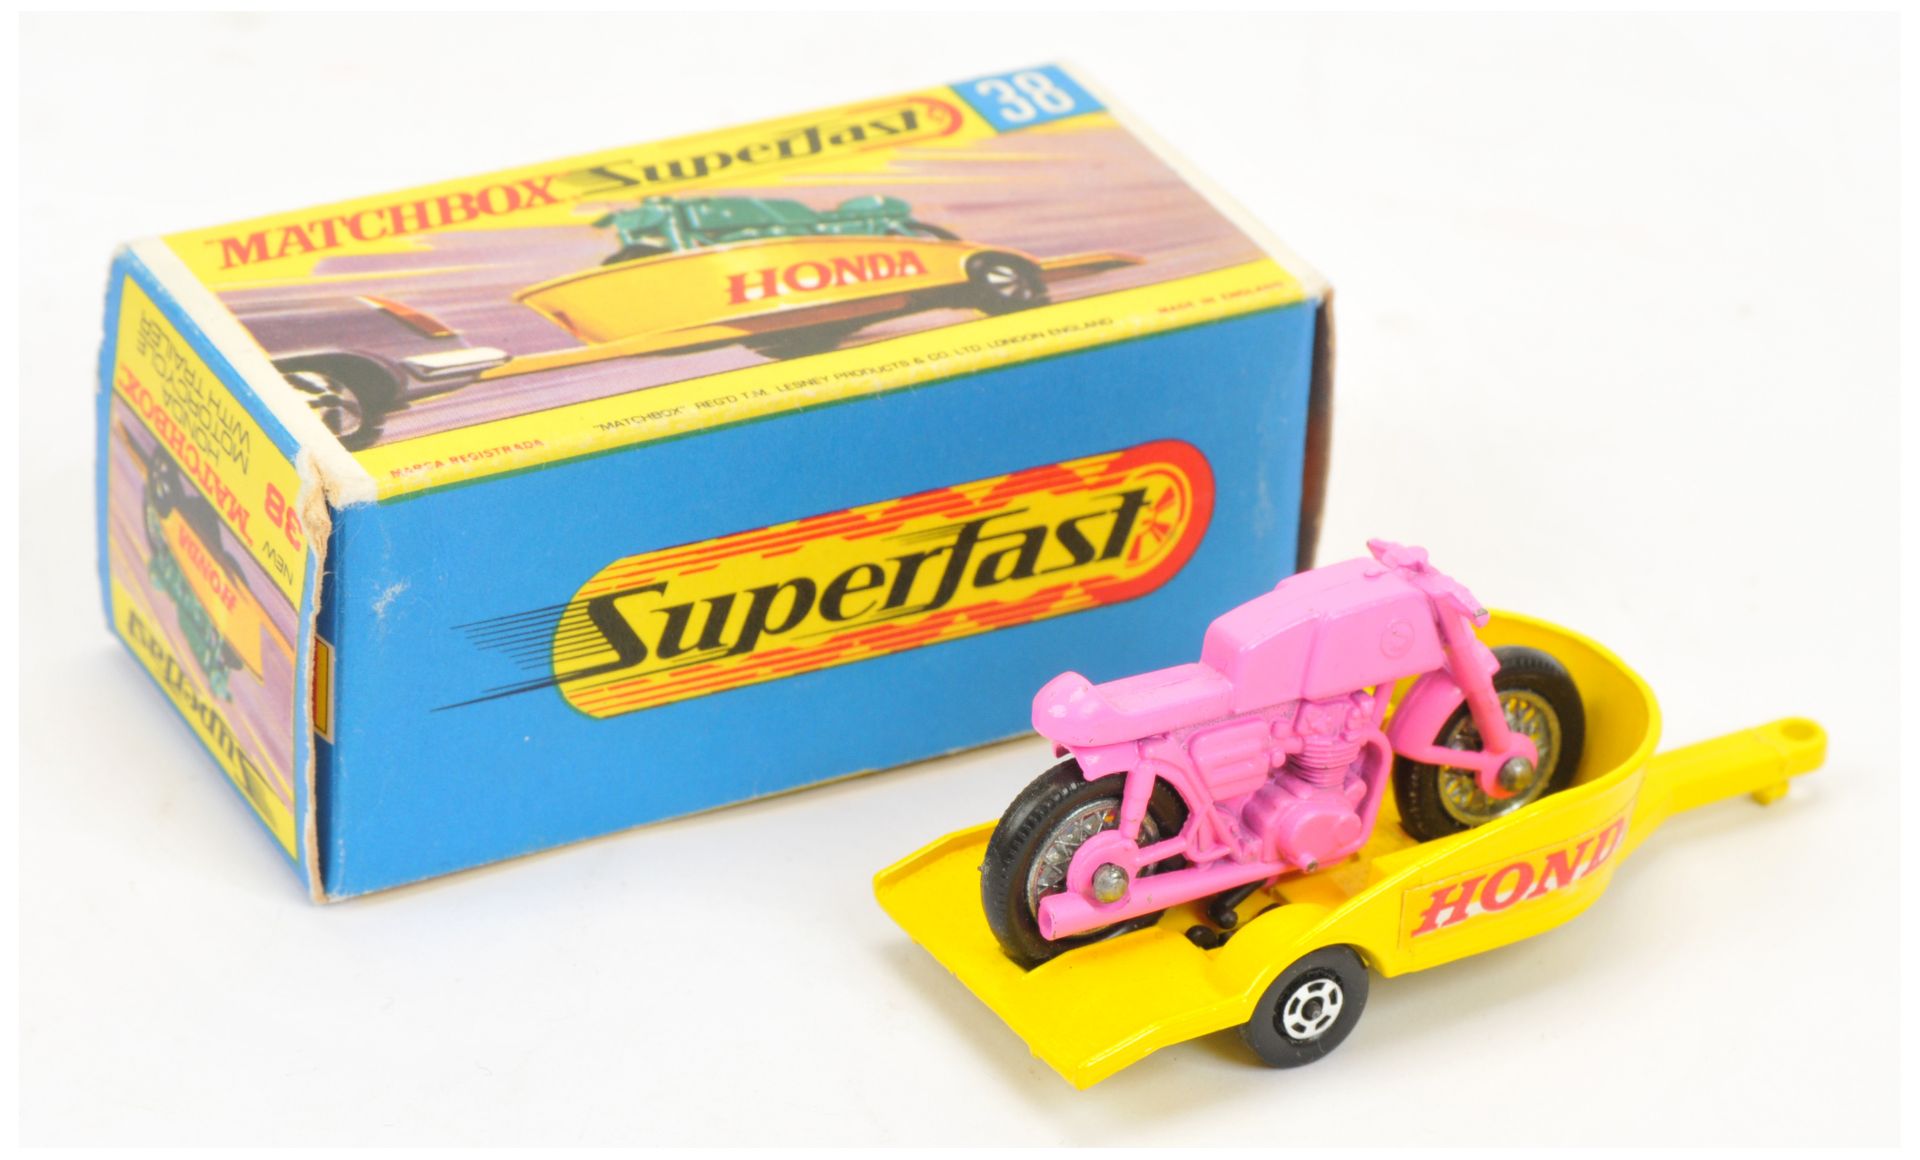 Matchbox Superfast 38a Honda Motorcycle & Trailer - pink motorcycle, lemon yellow trailer with Ho... - Image 2 of 2